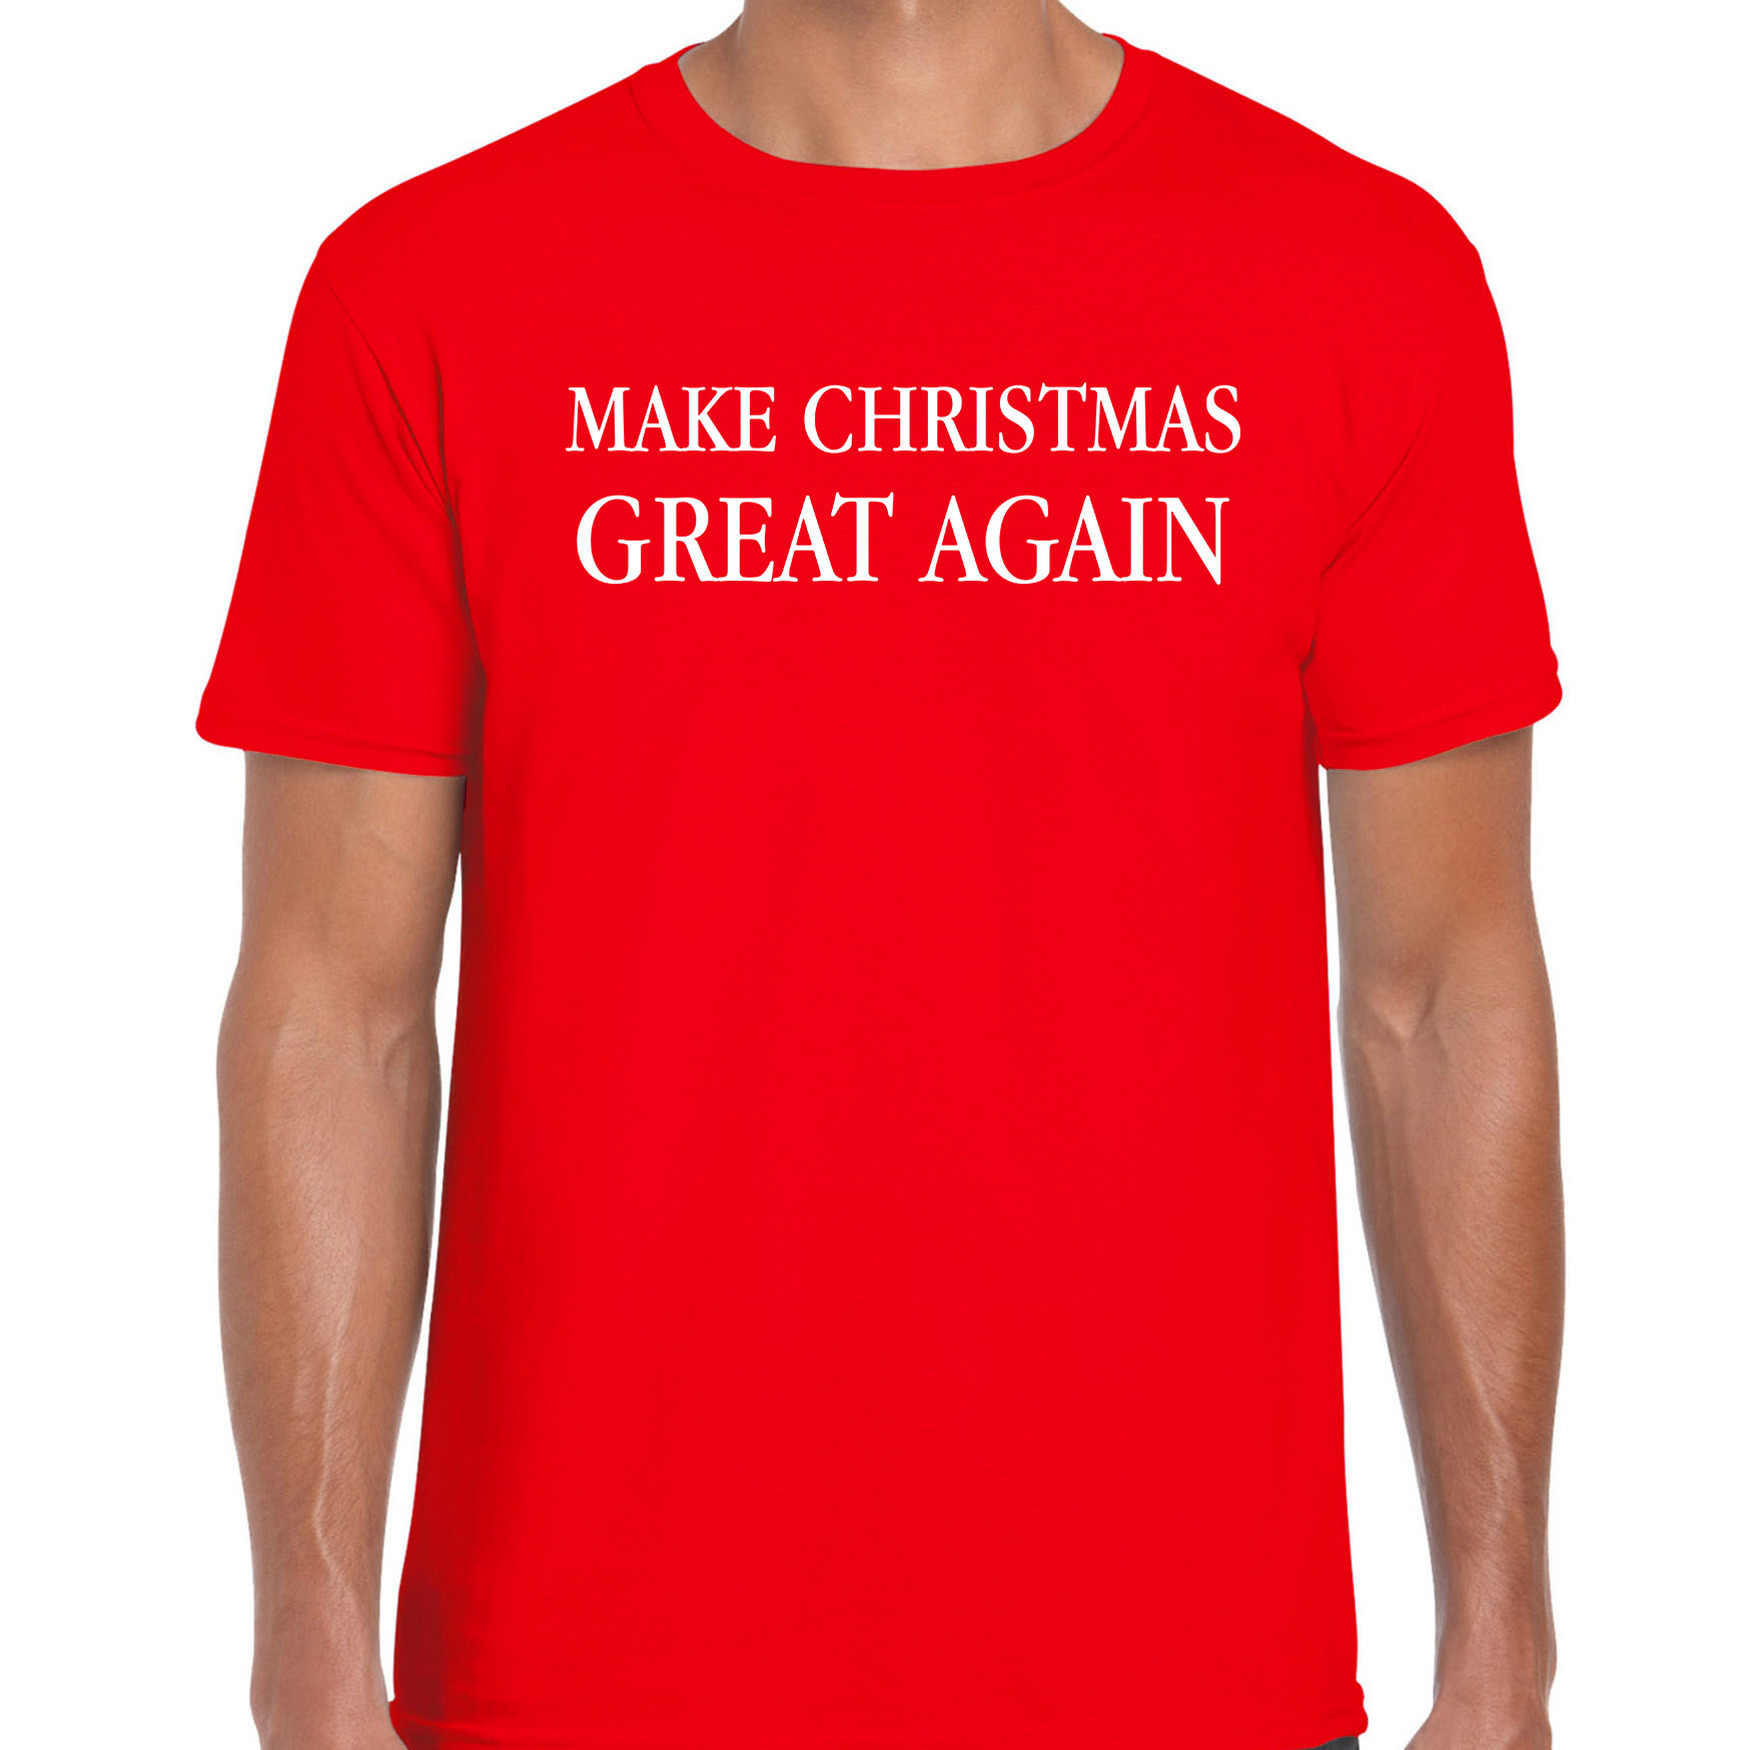 Make Christmas great again Kerst t-shirt-Kerst outfit rood voor heren